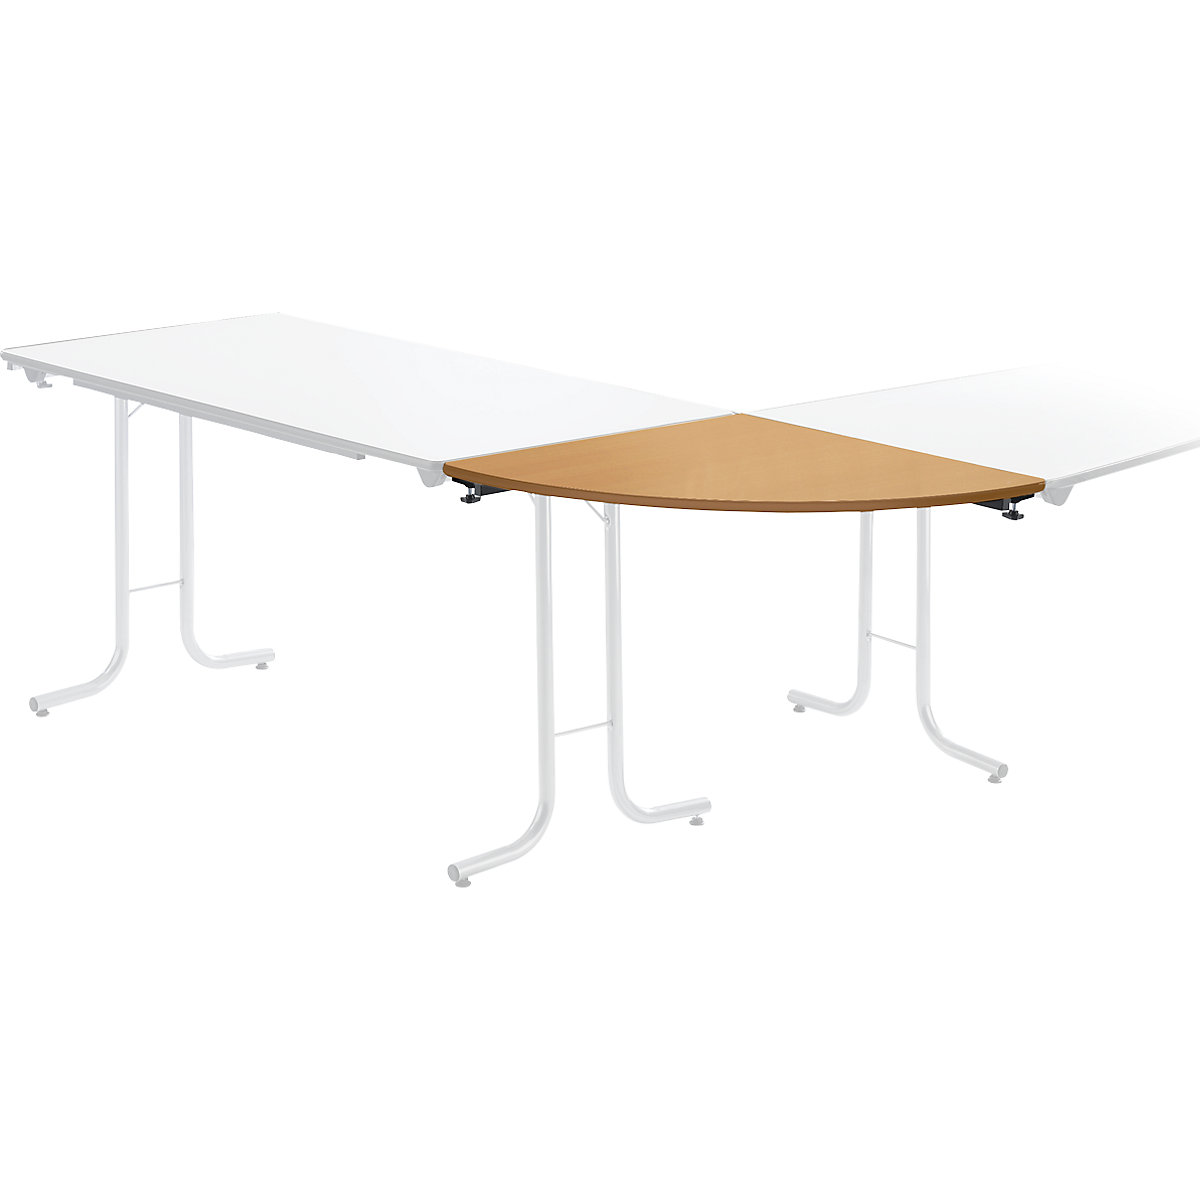 Extension table for folding table, quarter circle top, 700 x 700 mm, black frame, beech finish tabletop-5